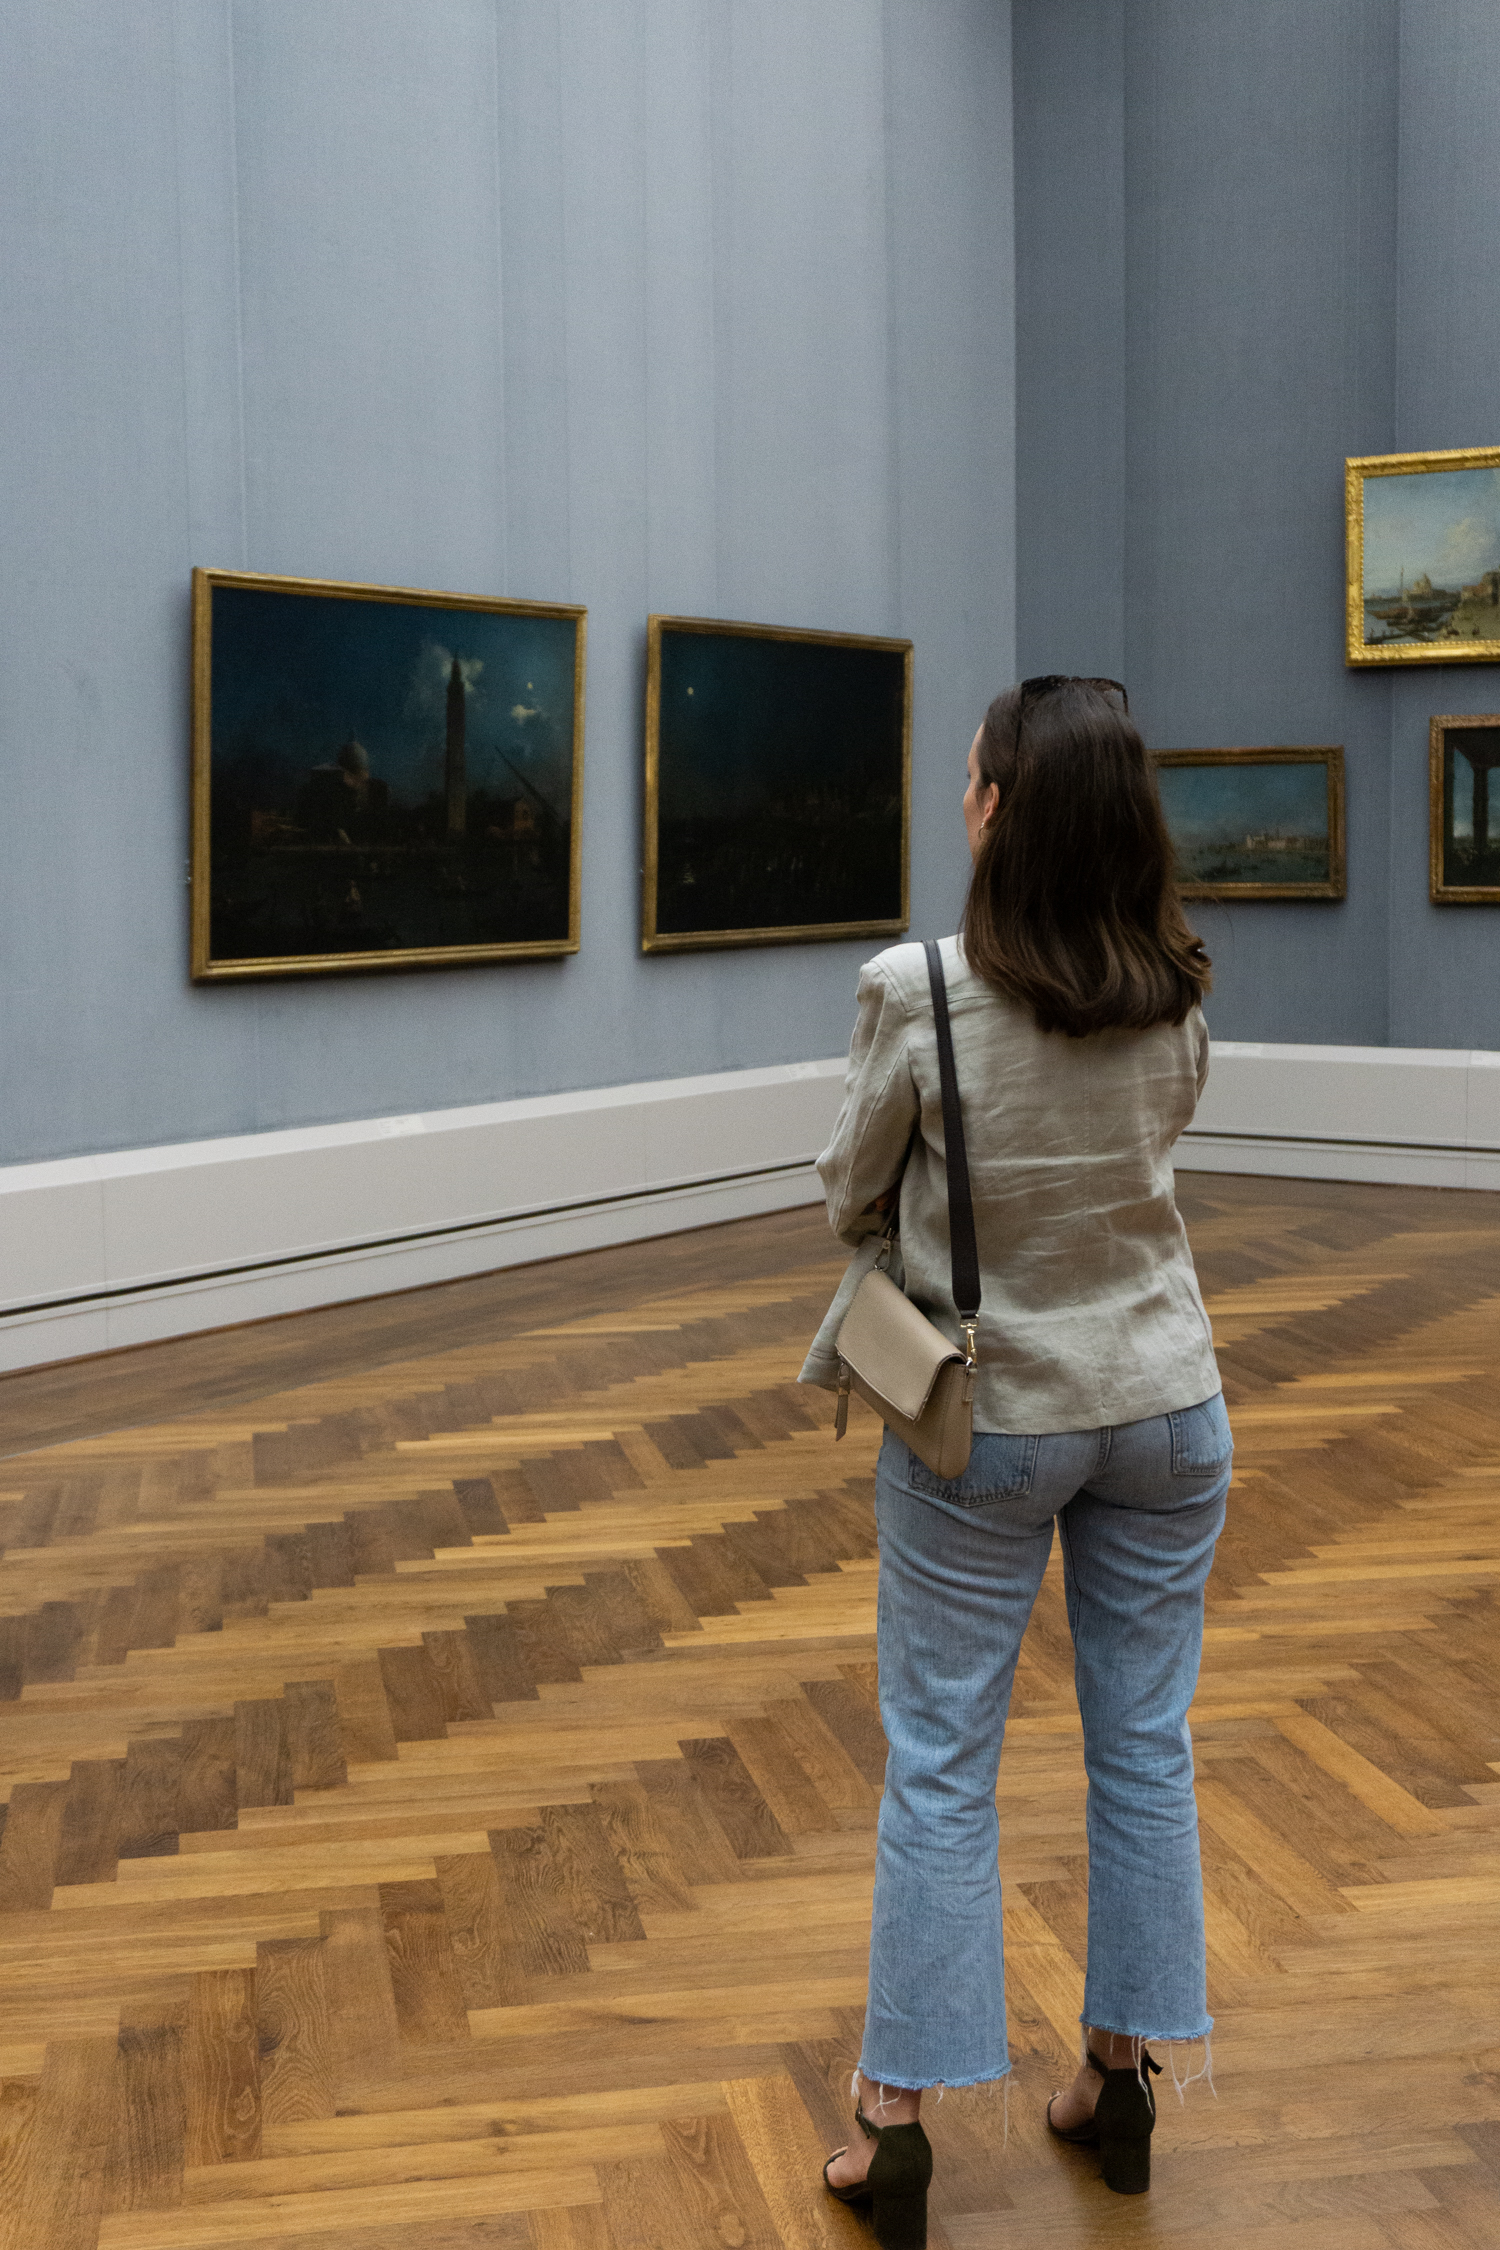 Berlin Gemäldegalerie, Classic Art Museum - Soothing Interior with Historic Paintings | RG Daily Blog, City Travel Guide